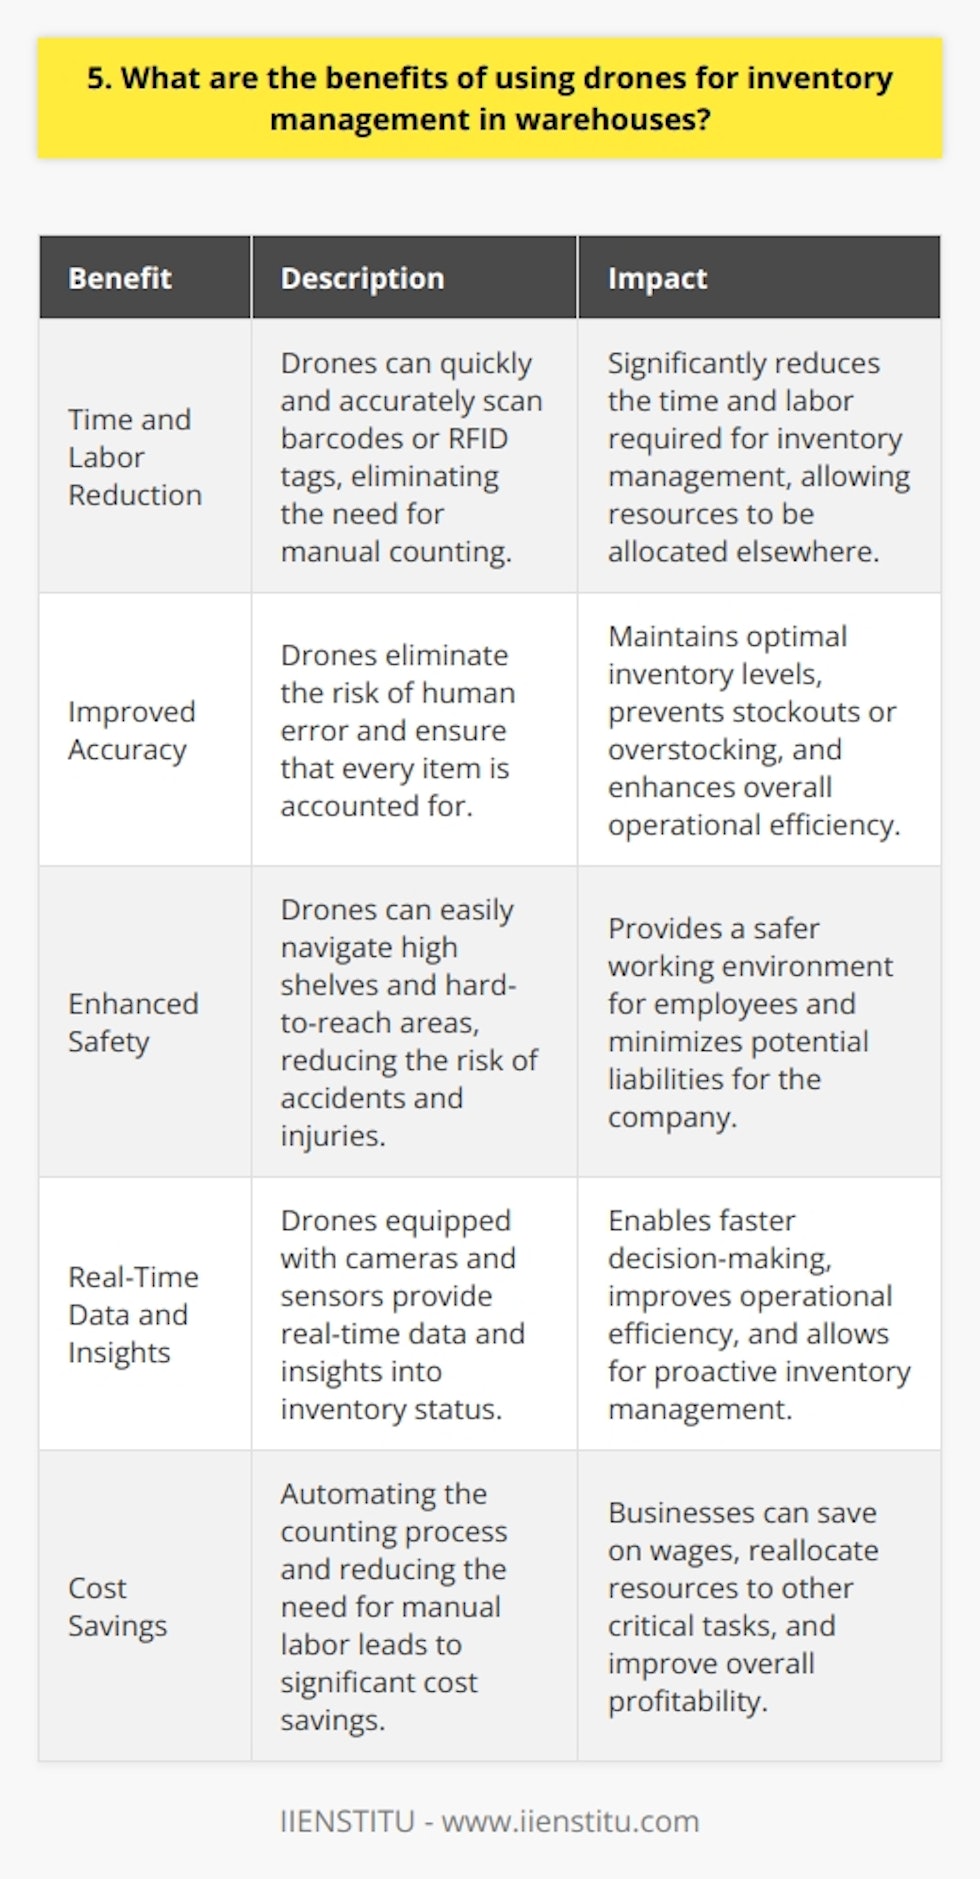 Drones offer numerous benefits for inventory management in warehouses. First and foremost, they can significantly reduce the time and labor required to conduct inventory counts. By flying through the warehouse and scanning barcodes or RFID tags, drones can quickly and accurately track inventory levels without the need for manual counting. Improved Accuracy and Efficiency In addition to speed, drones also provide improved accuracy compared to manual methods. They eliminate the risk of human error and ensure that every item is accounted for. This level of precision is crucial for maintaining optimal inventory levels and avoiding stockouts or overstocking. Enhanced Safety Another key benefit of using drones is enhanced safety. Warehouses often have high shelves and hard-to-reach areas that can be dangerous for employees to access. Drones can easily navigate these spaces, reducing the risk of accidents and injuries. Real-Time Data and Insights Drones equipped with cameras and sensors can also provide real-time data and insights into inventory status. This information can be instantly transmitted to warehouse management systems, enabling faster decision-making and improving overall operational efficiency. Cost Savings In the long run, implementing drone technology for inventory management can lead to significant cost savings. By automating the counting process and reducing the need for manual labor, businesses can save on wages and reallocate resources to other critical tasks. I remember when I first saw a drone in action at a warehouse. It was amazing to watch it zip through the aisles, effortlessly scanning barcodes and updating the inventory records in real-time. The efficiency and accuracy it brought to the process was truly impressive. As someone who has worked in logistics, I believe that drones are the future of inventory management. They offer a level of speed, precision, and safety that simply cant be matched by traditional methods. While there may be some initial investment required to implement this technology, the long-term benefits are well worth it.